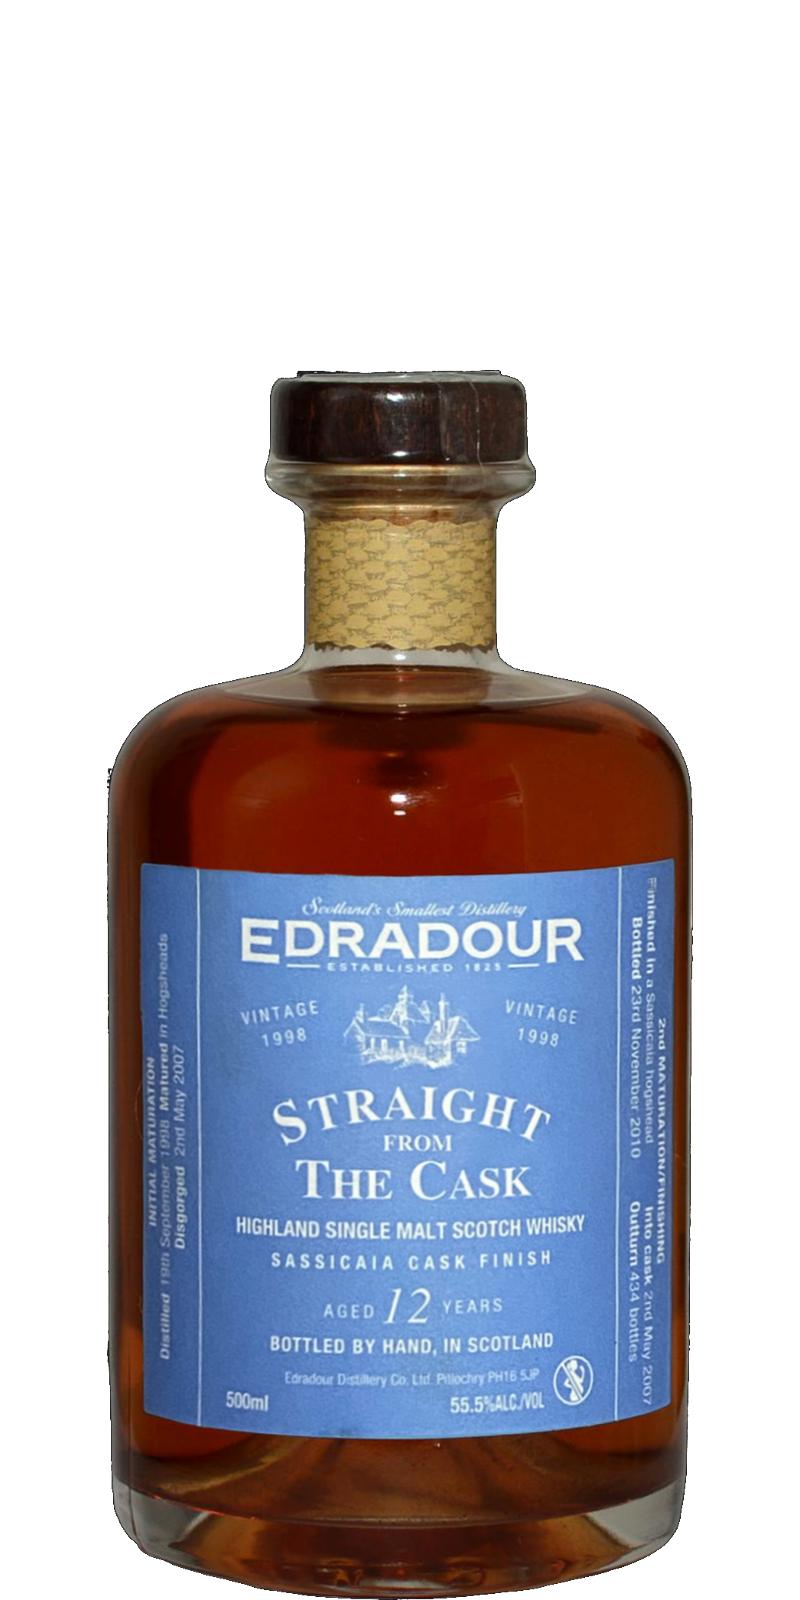 Edradour 1998 Straight From The Cask Sassicaia Cask Finish 55.5% 500ml